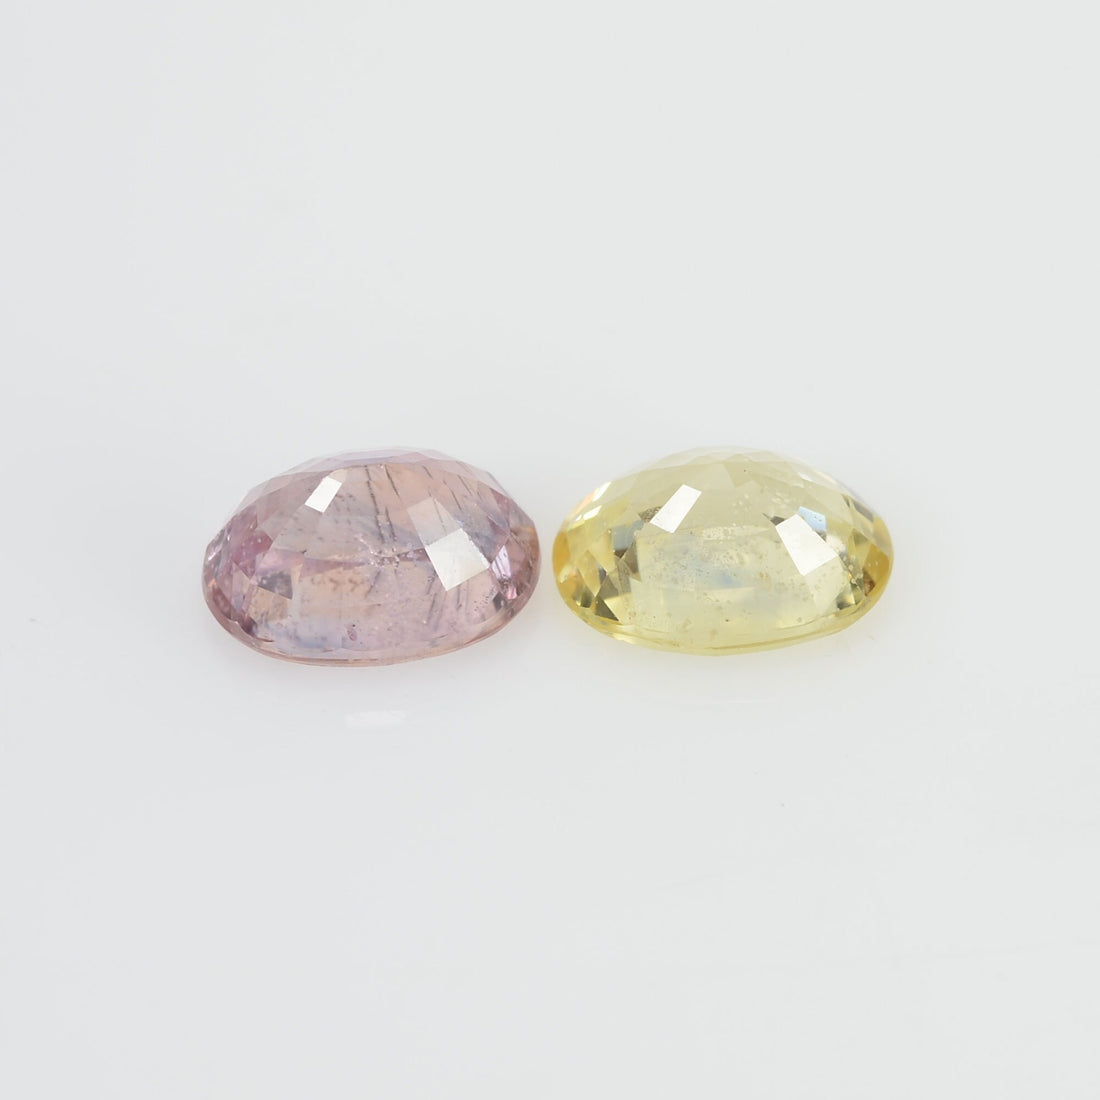 2.28 cts Natural Fancy Sapphire Loose Pair Gemstone Oval Cut